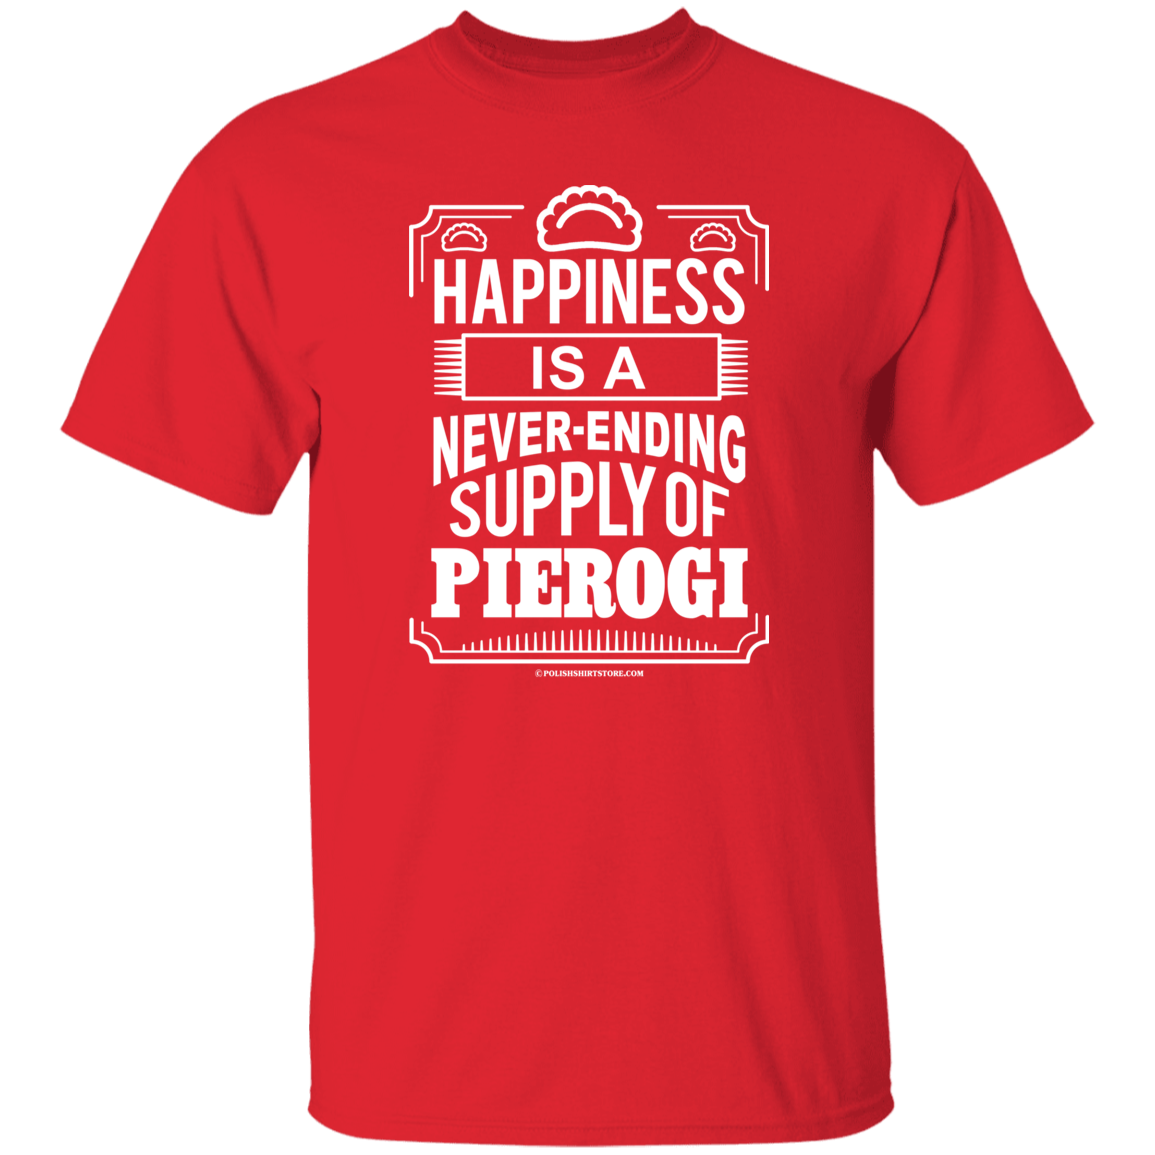 Happiness Is A Never Ending Supply Of Pierogi Apparel CustomCat G500 5.3 oz. T-Shirt Red S